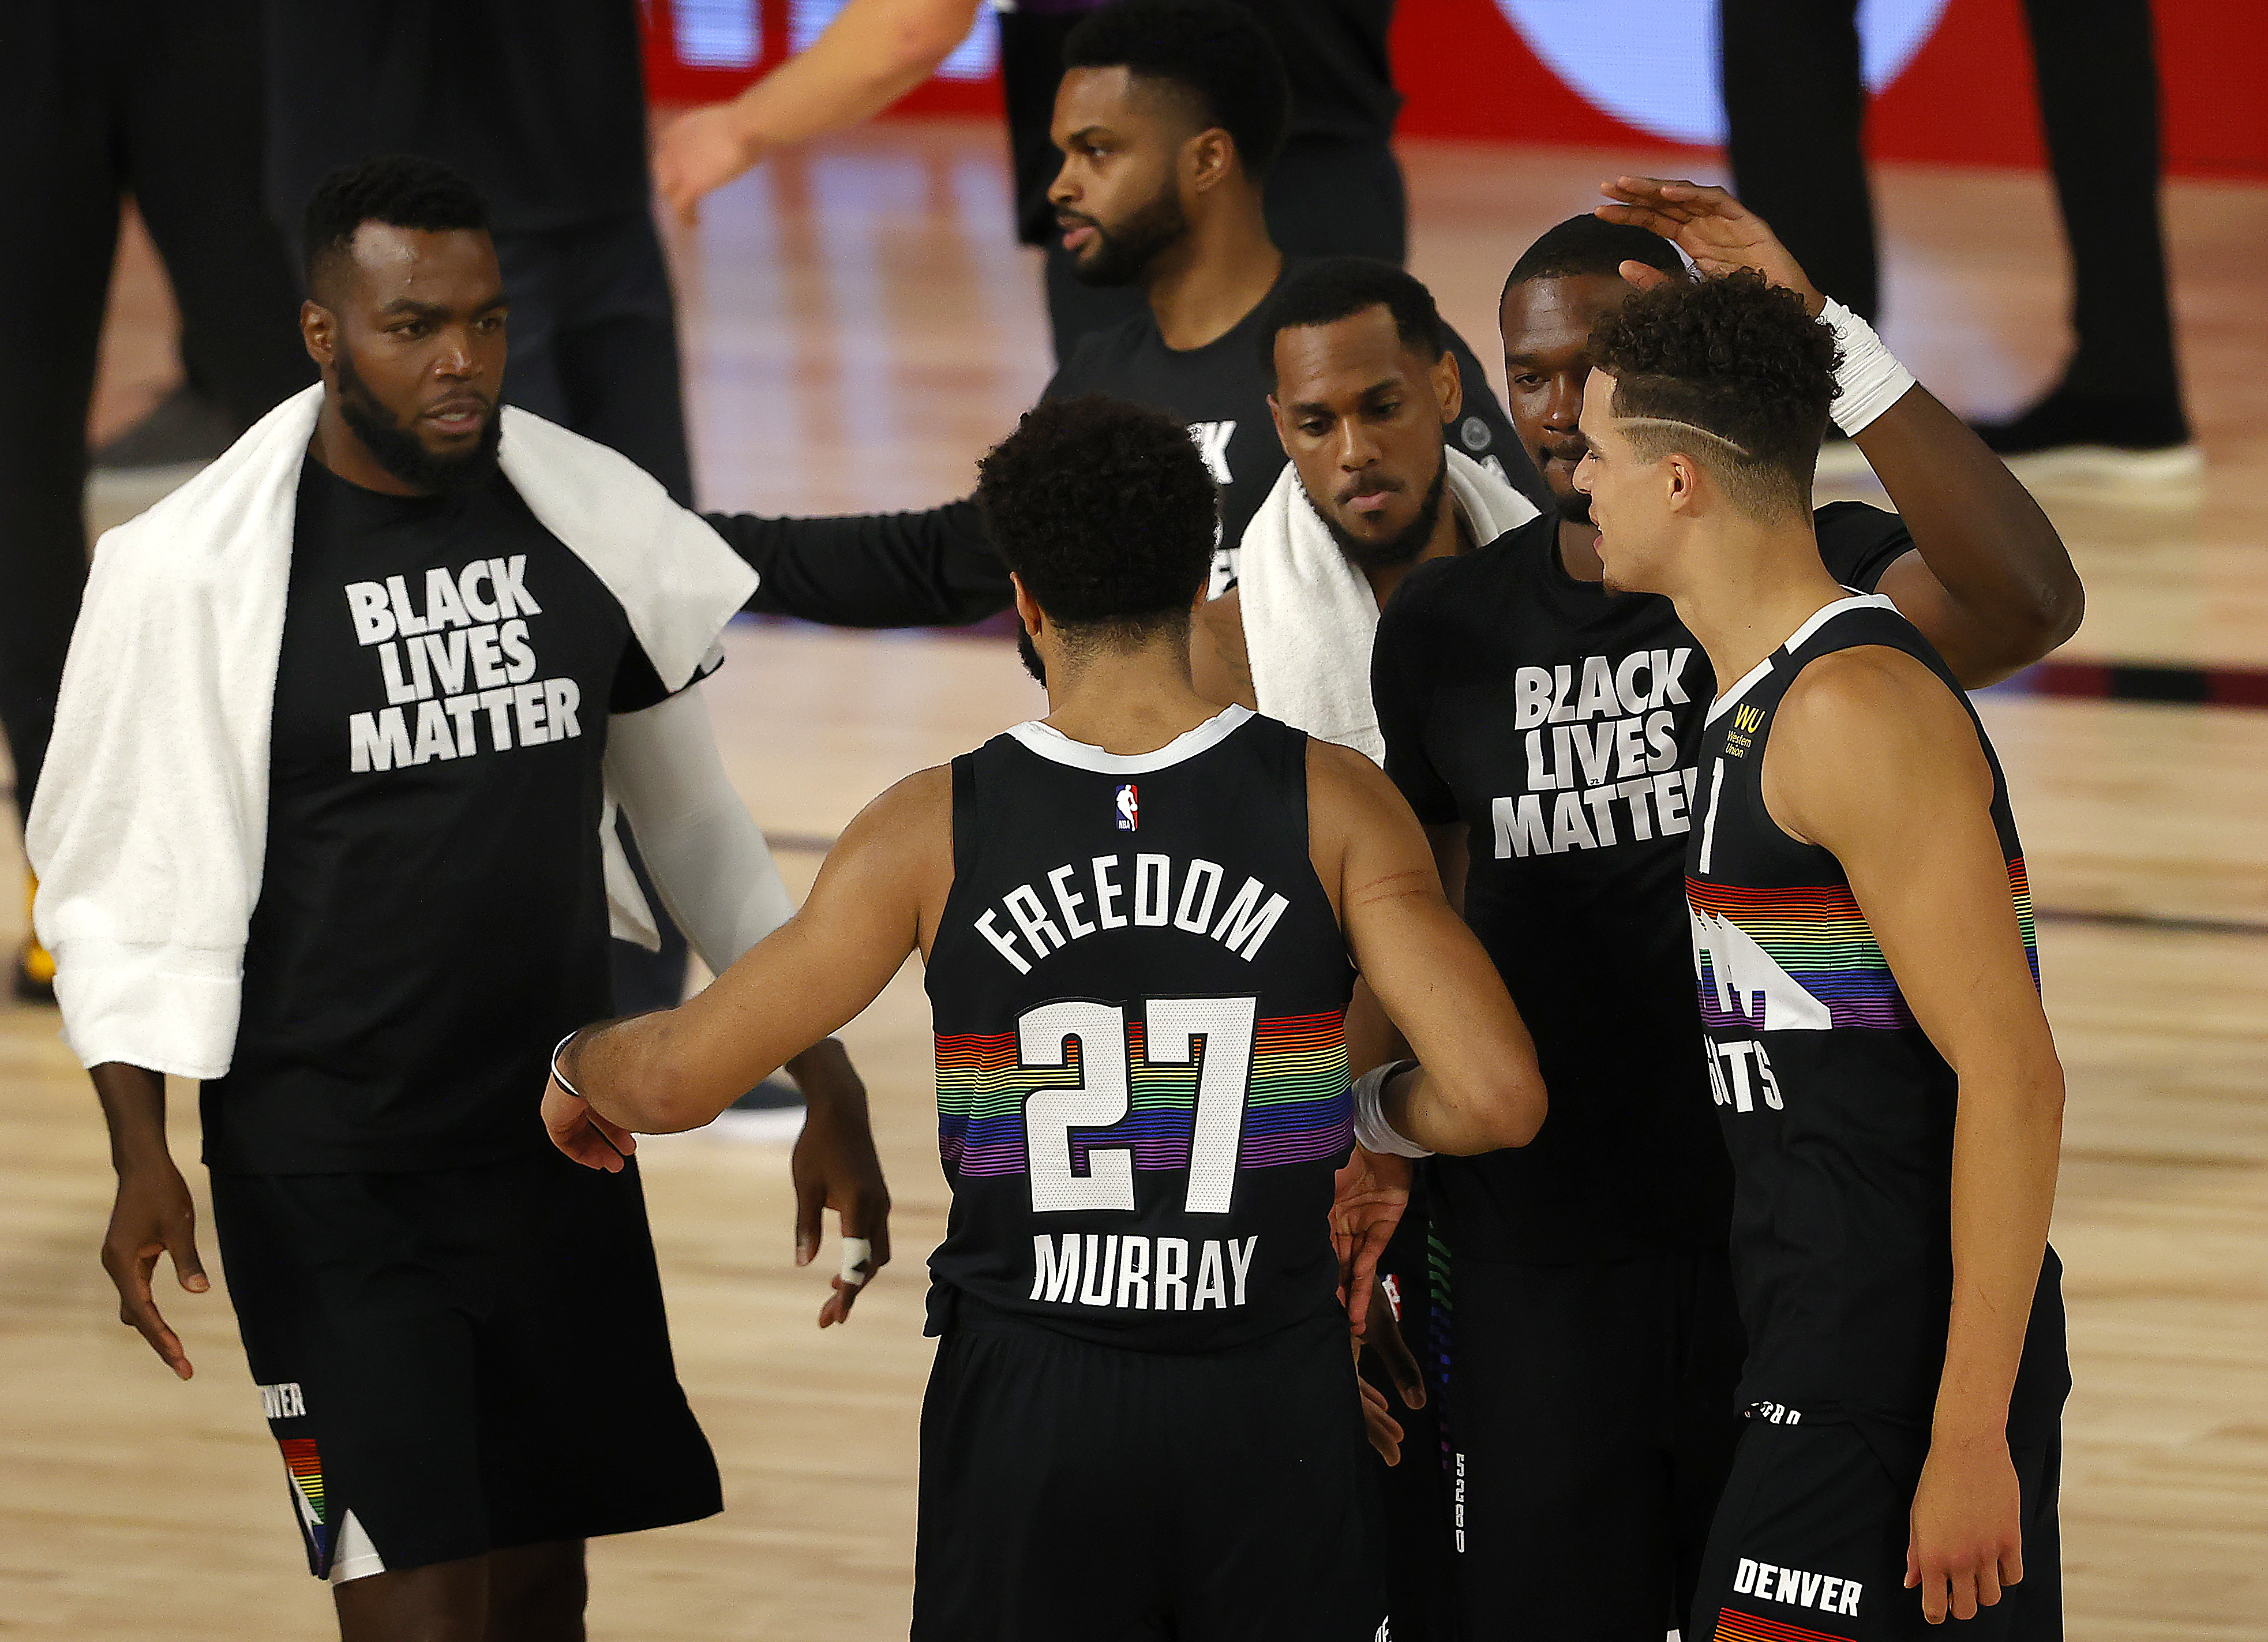 NBA News Update: LeBron James unveils Space Jam 2 jersey, Donovan Mitchell  and Jamal Murray bump into each other after their battle on the court